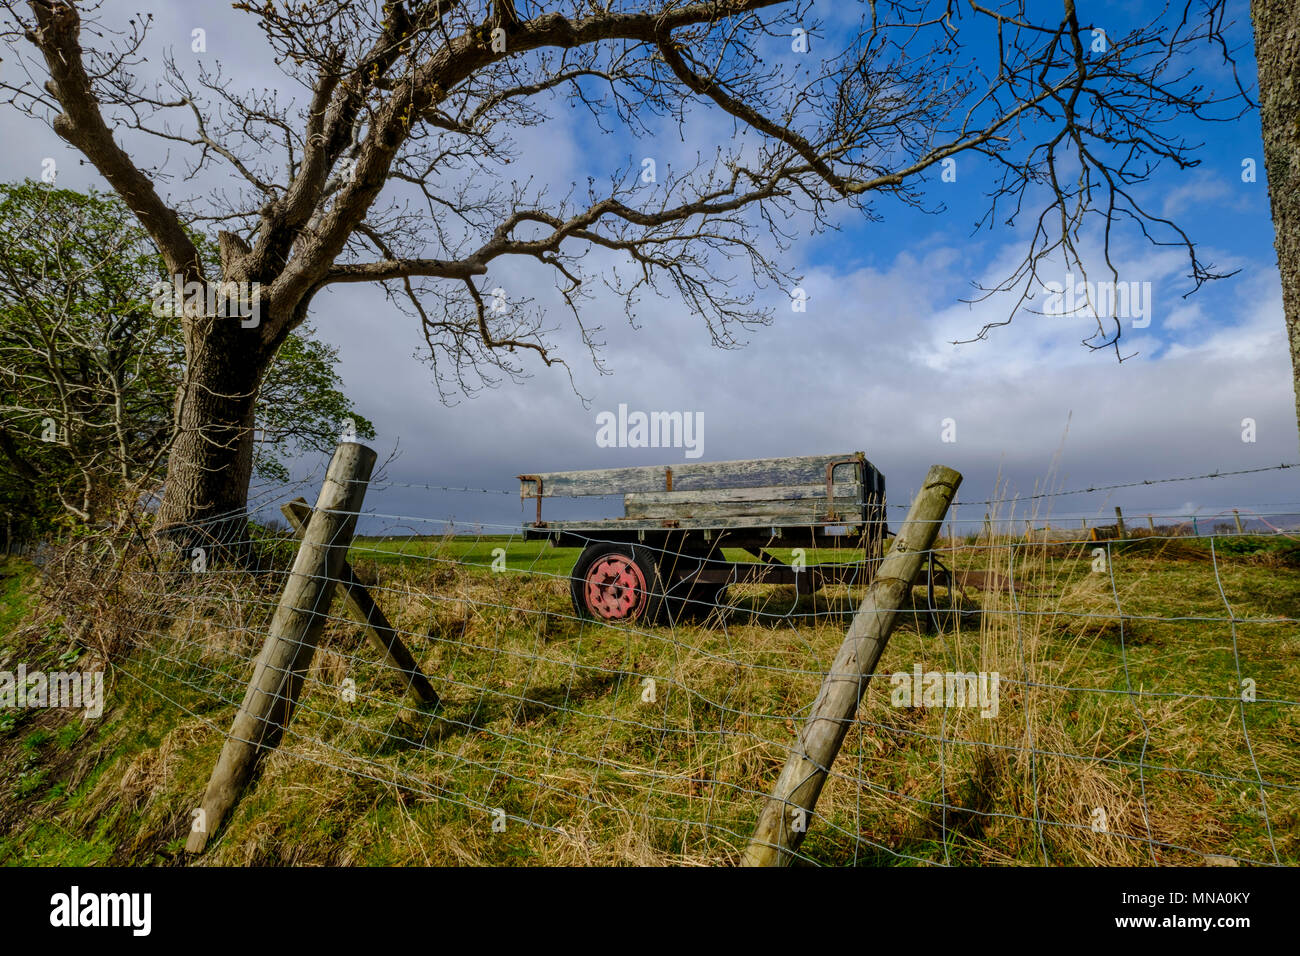 Landscape format of Scottish rural scene of old weathered farm trailer in field with tree branches and cloudy sky Stock Photo